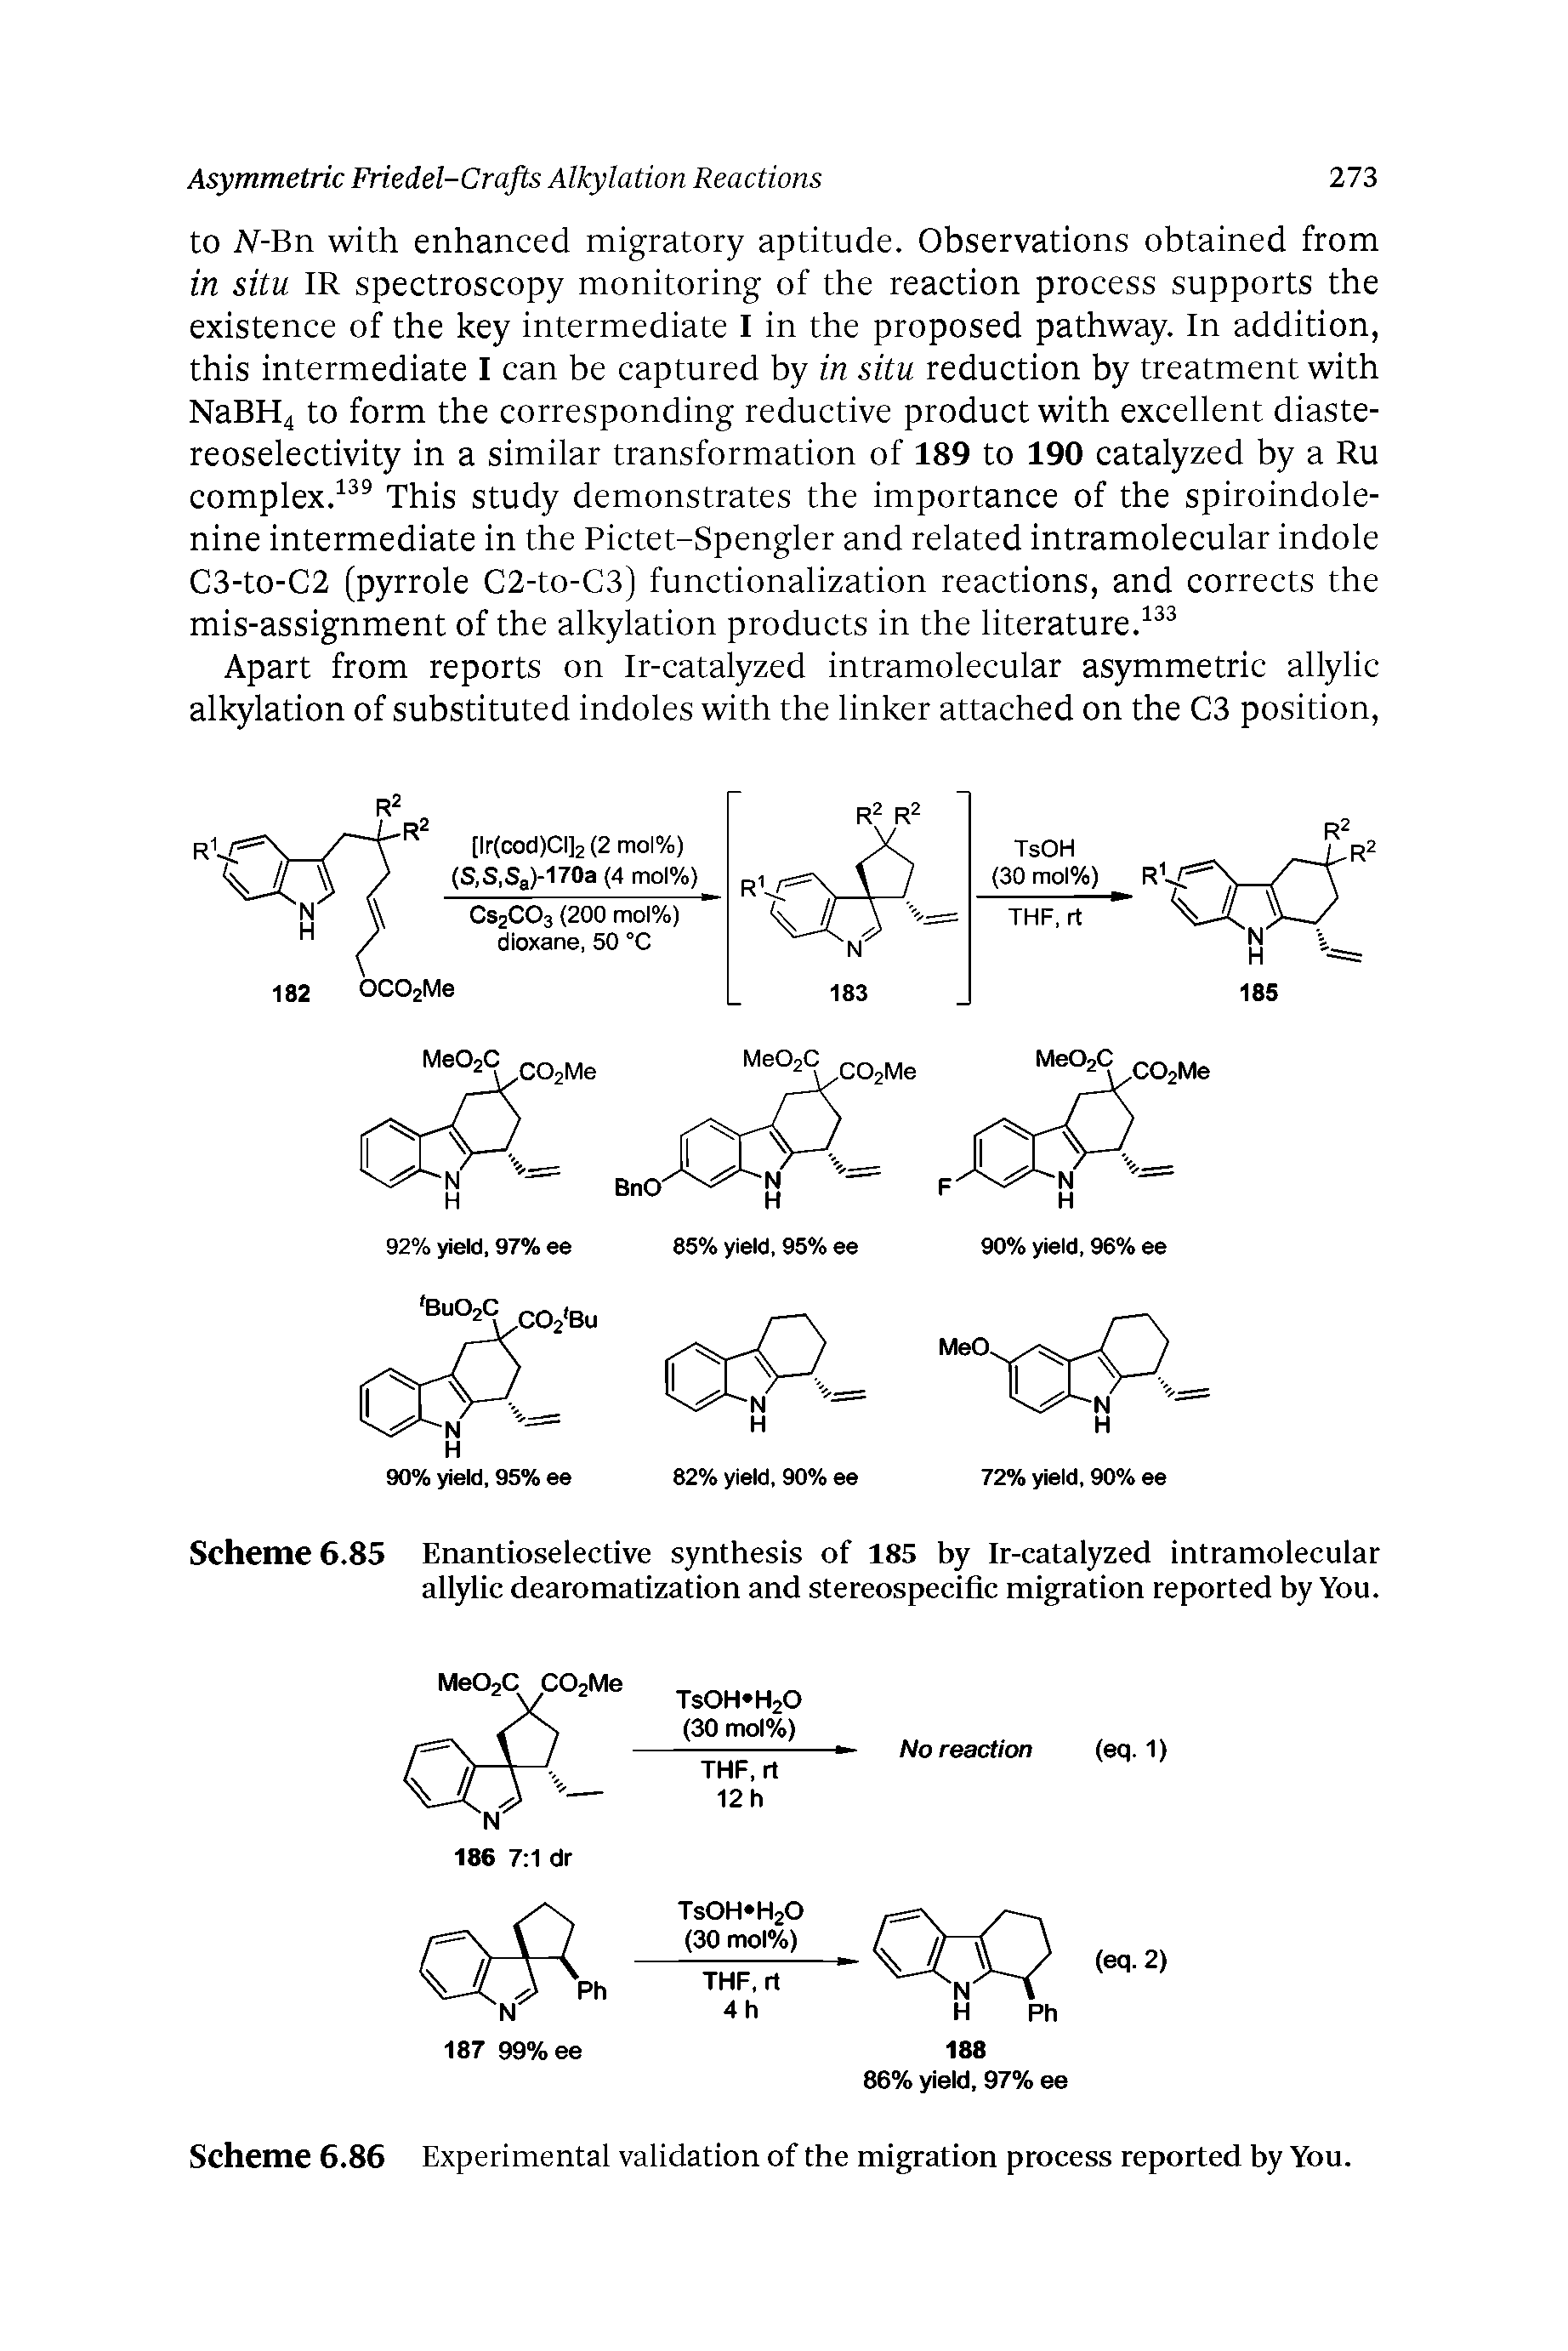 Scheme 6.85 Enantioselective synthesis of 185 by Ir-catalyzed intramolecular allylic dearomatization and stereospeciflc migration reported by You.